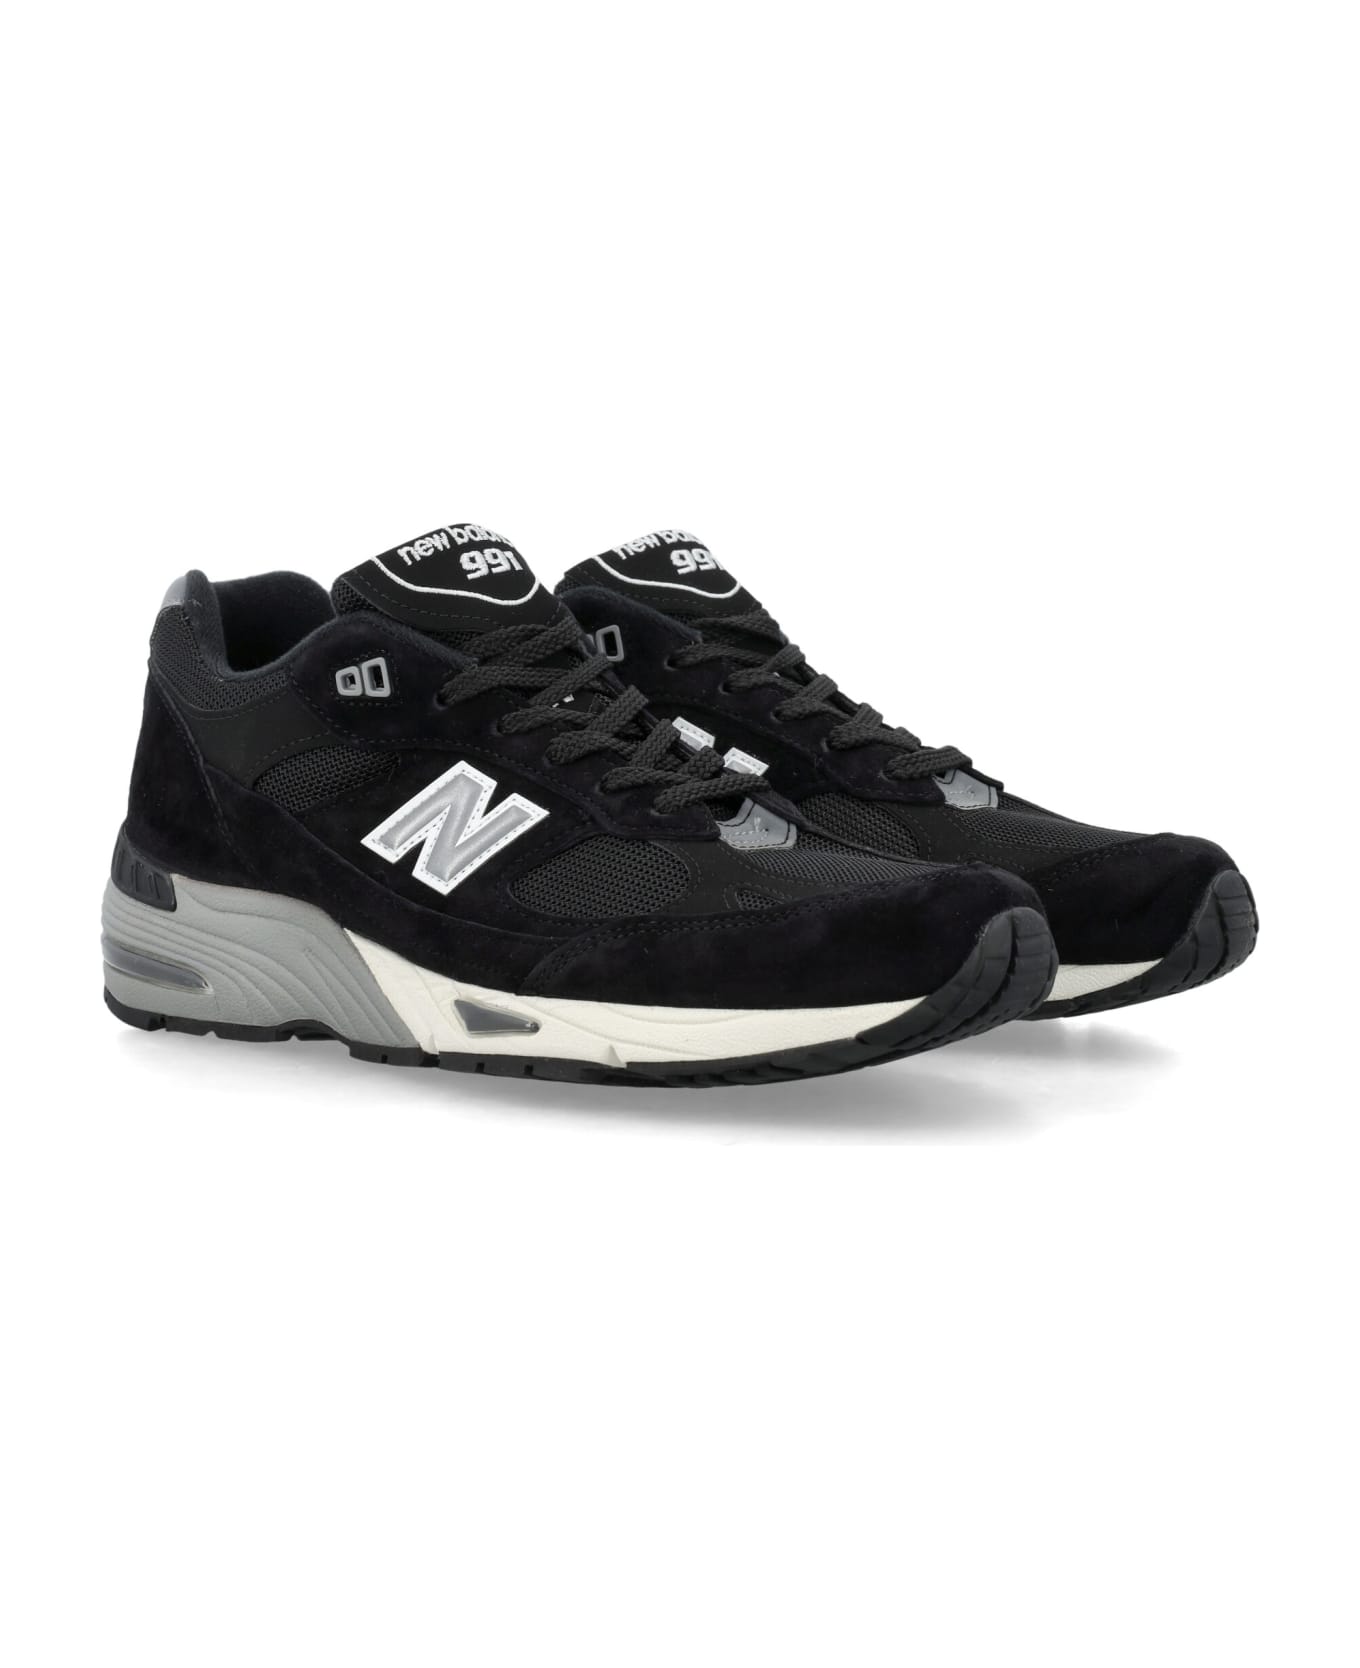 New Balance 991 Sneakers - BLACK/SILVER